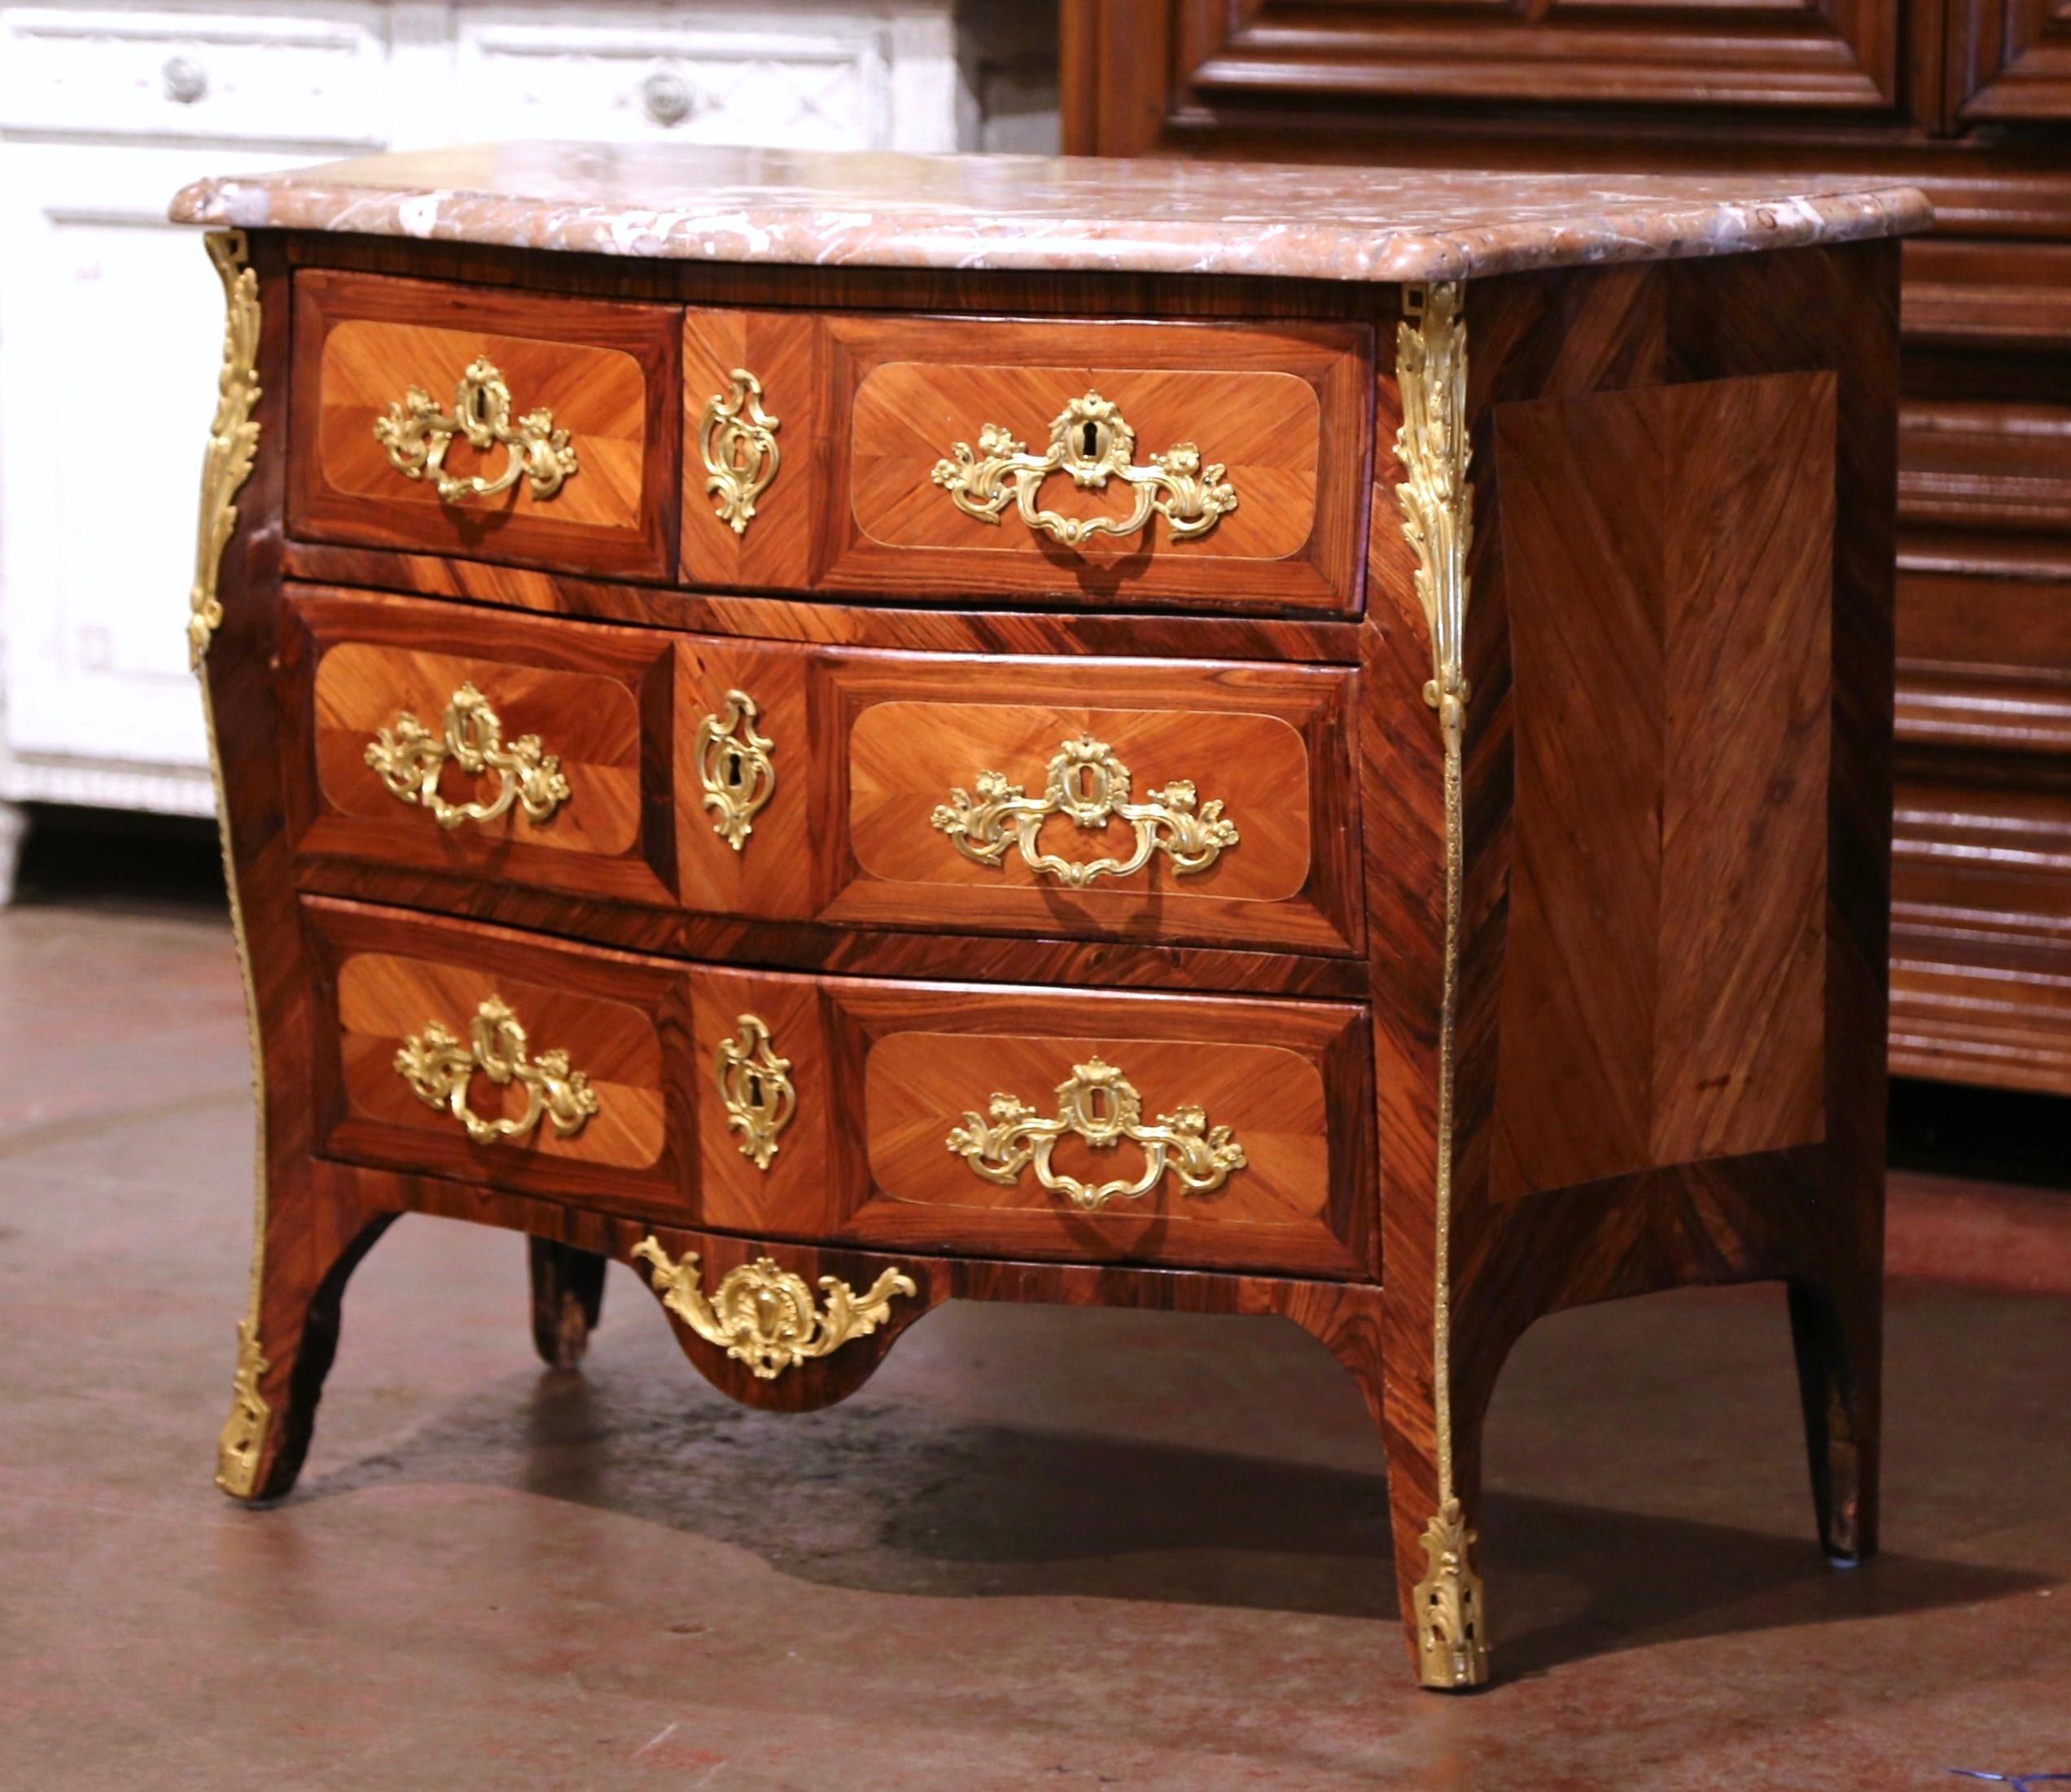 Crafted in Burgundy France circa 1780, the antique fruitwood commode stands on curved feet ending with bronze mounts over a scalloped apron decorated with a bronze shell and leaf motif mount. The chest features three rows across the front with four